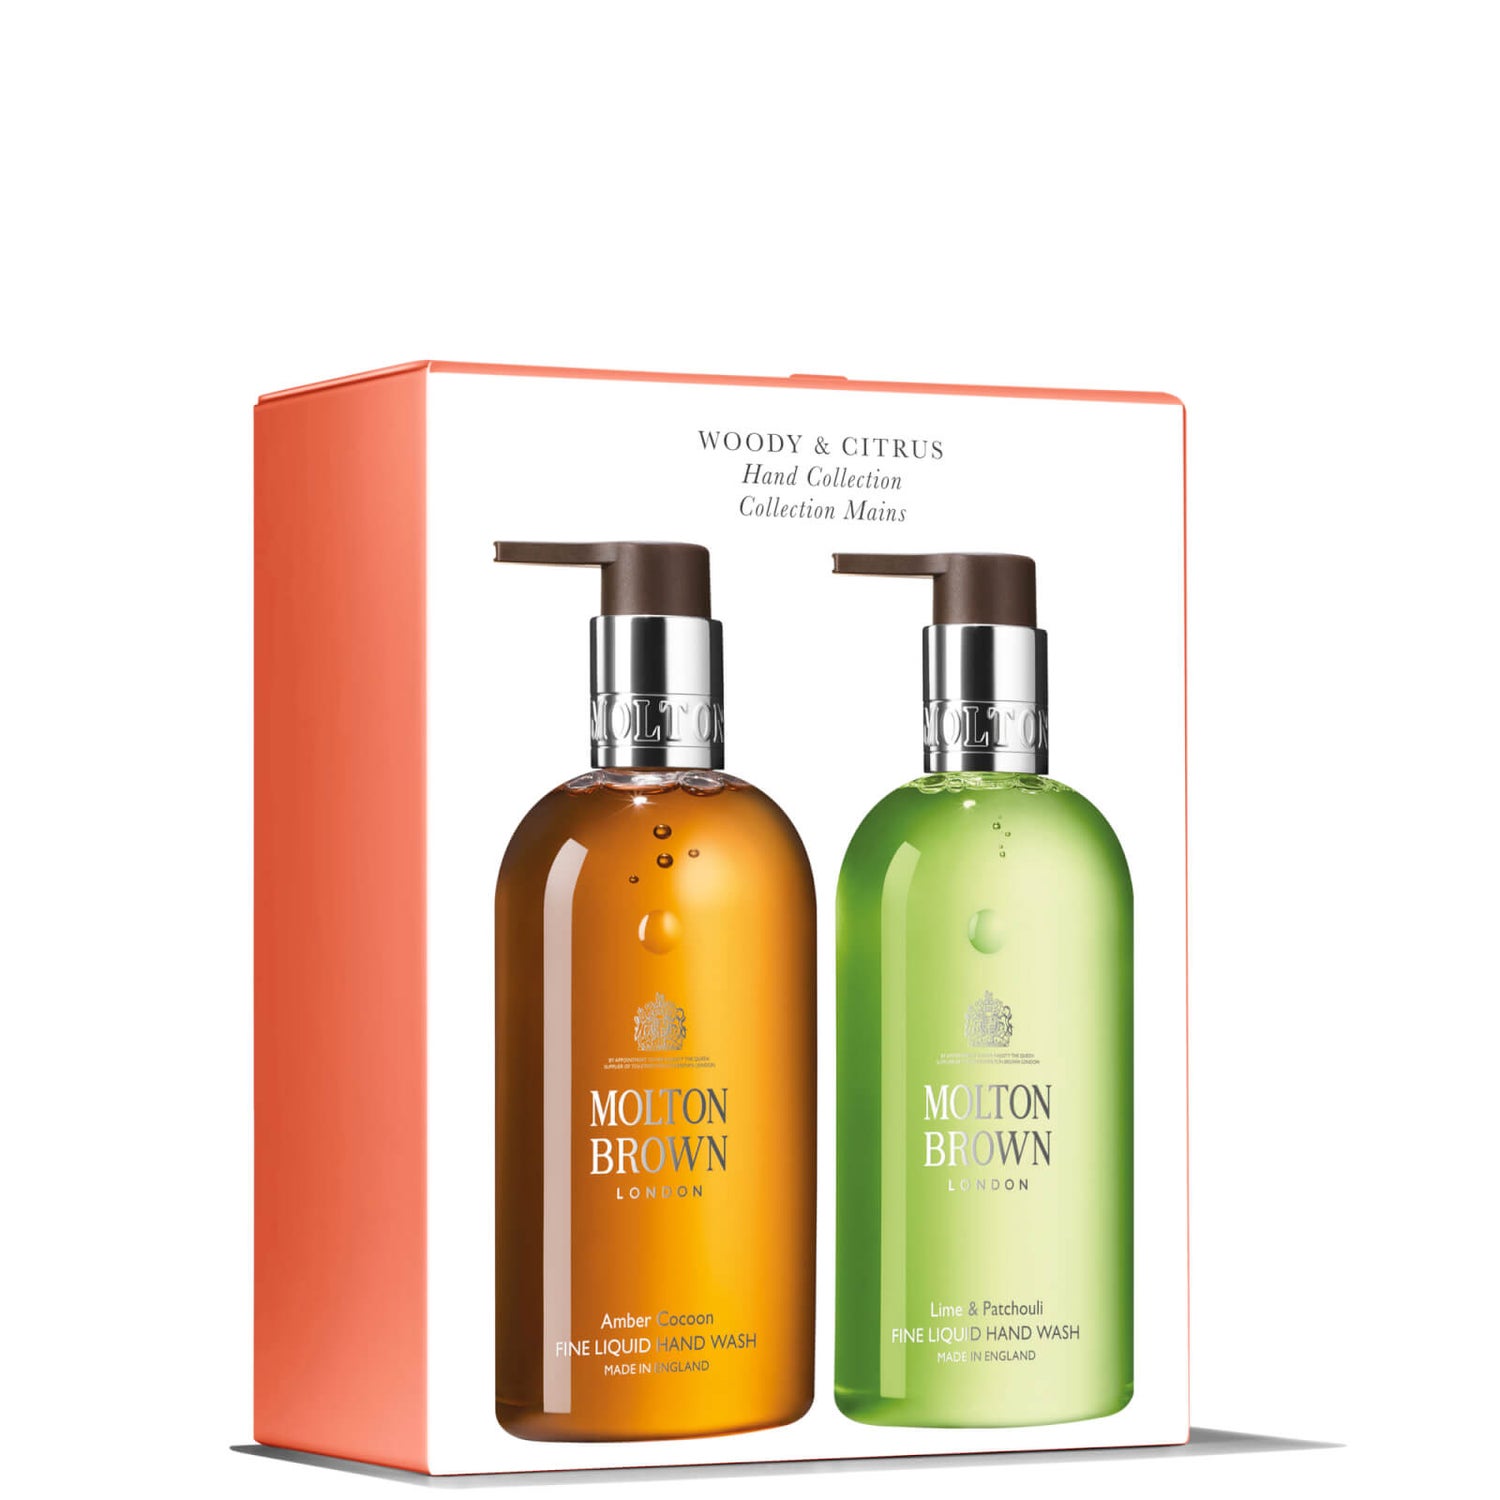 Molton Brown Woody and Citrus Hand Collection